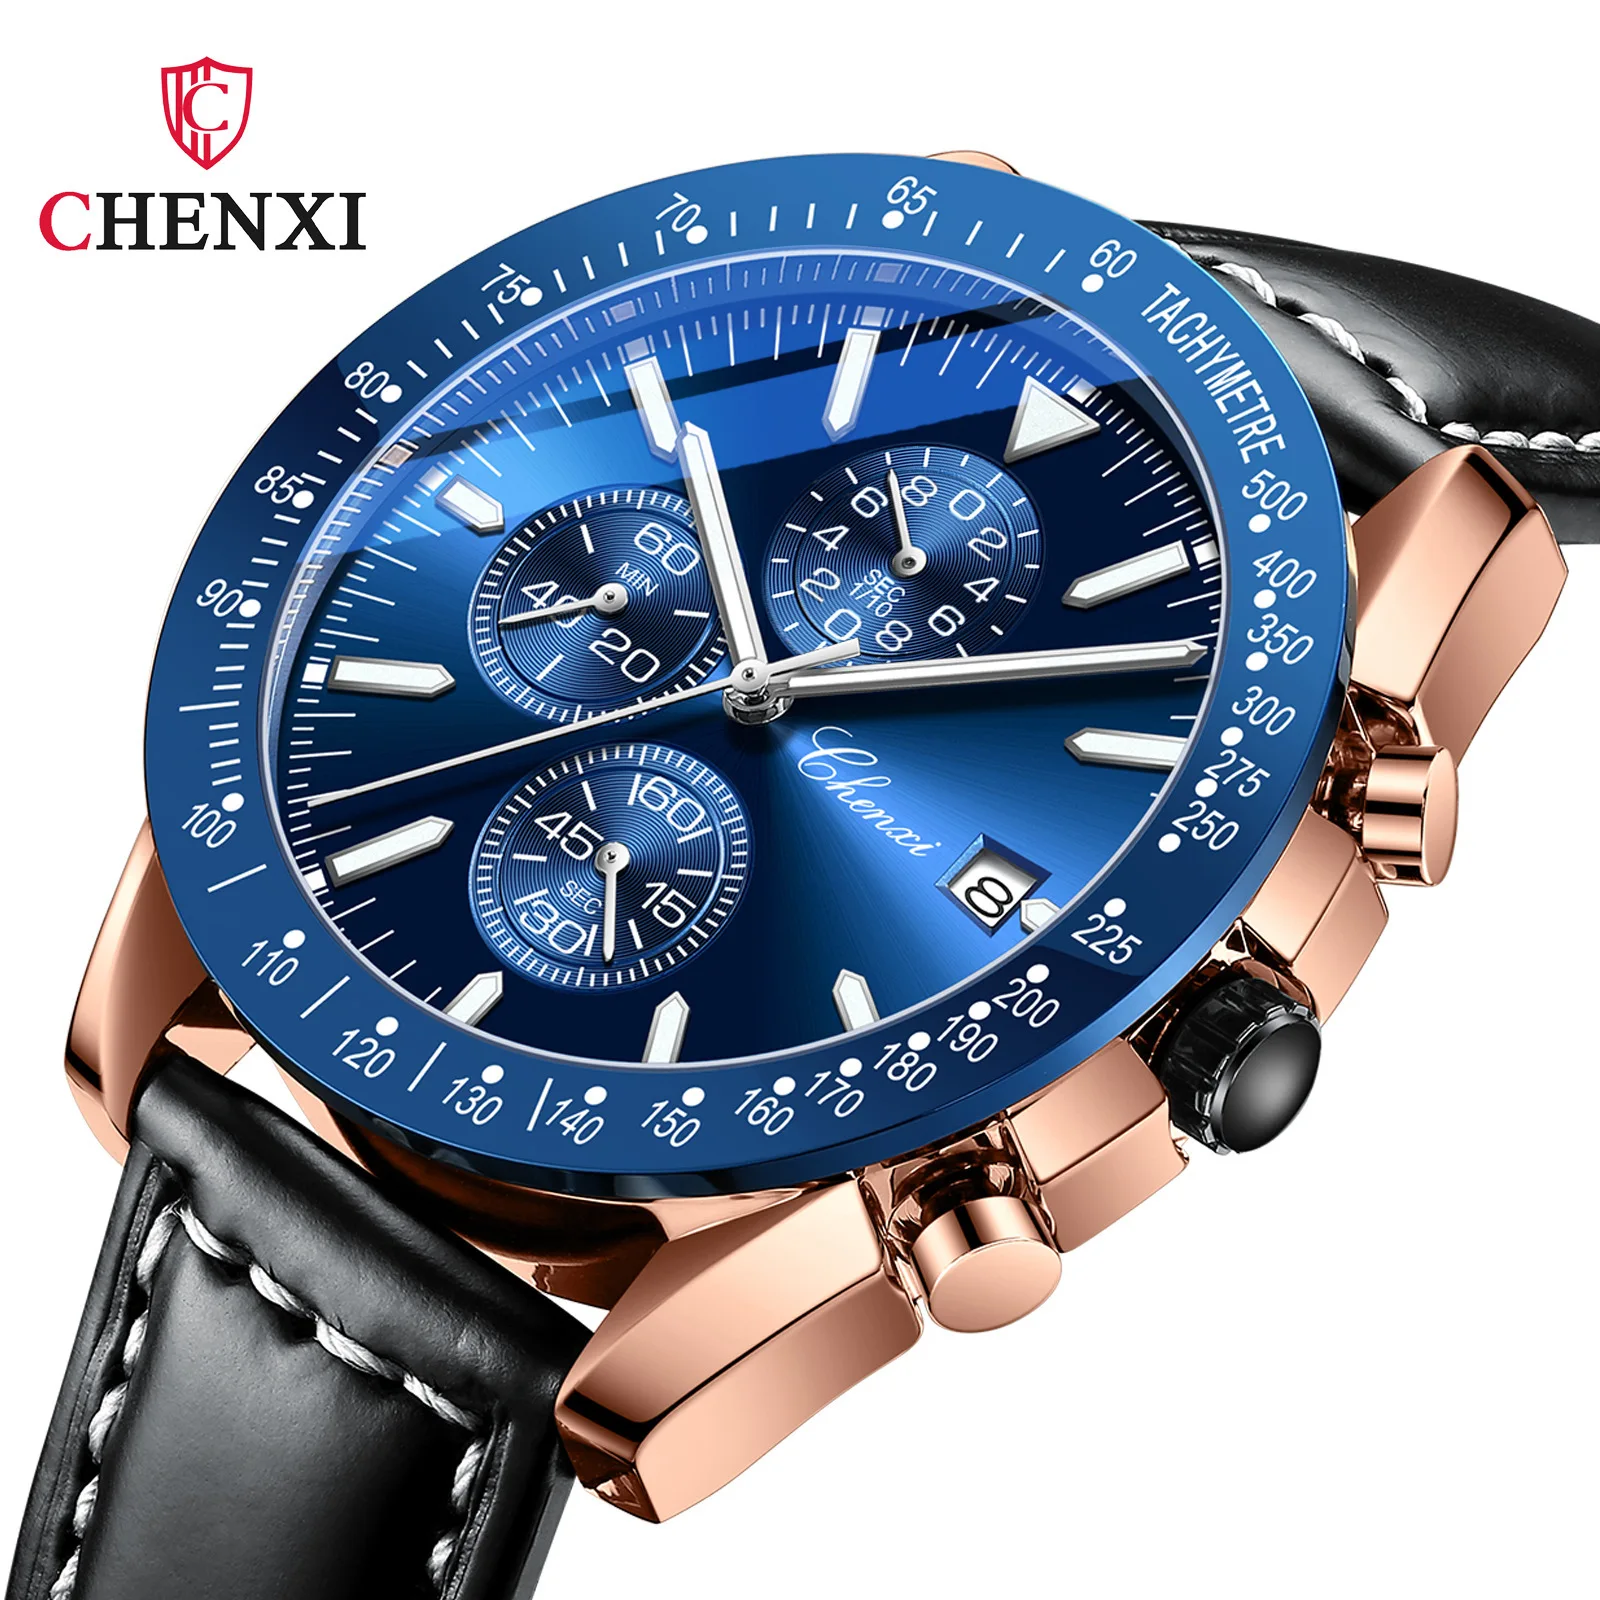 

CHENXI 960 Men's Quartz Watch Luxury Black Leather Strap Big Dial Chronograph Clock Casual Business Wrist Watches for Male Gift